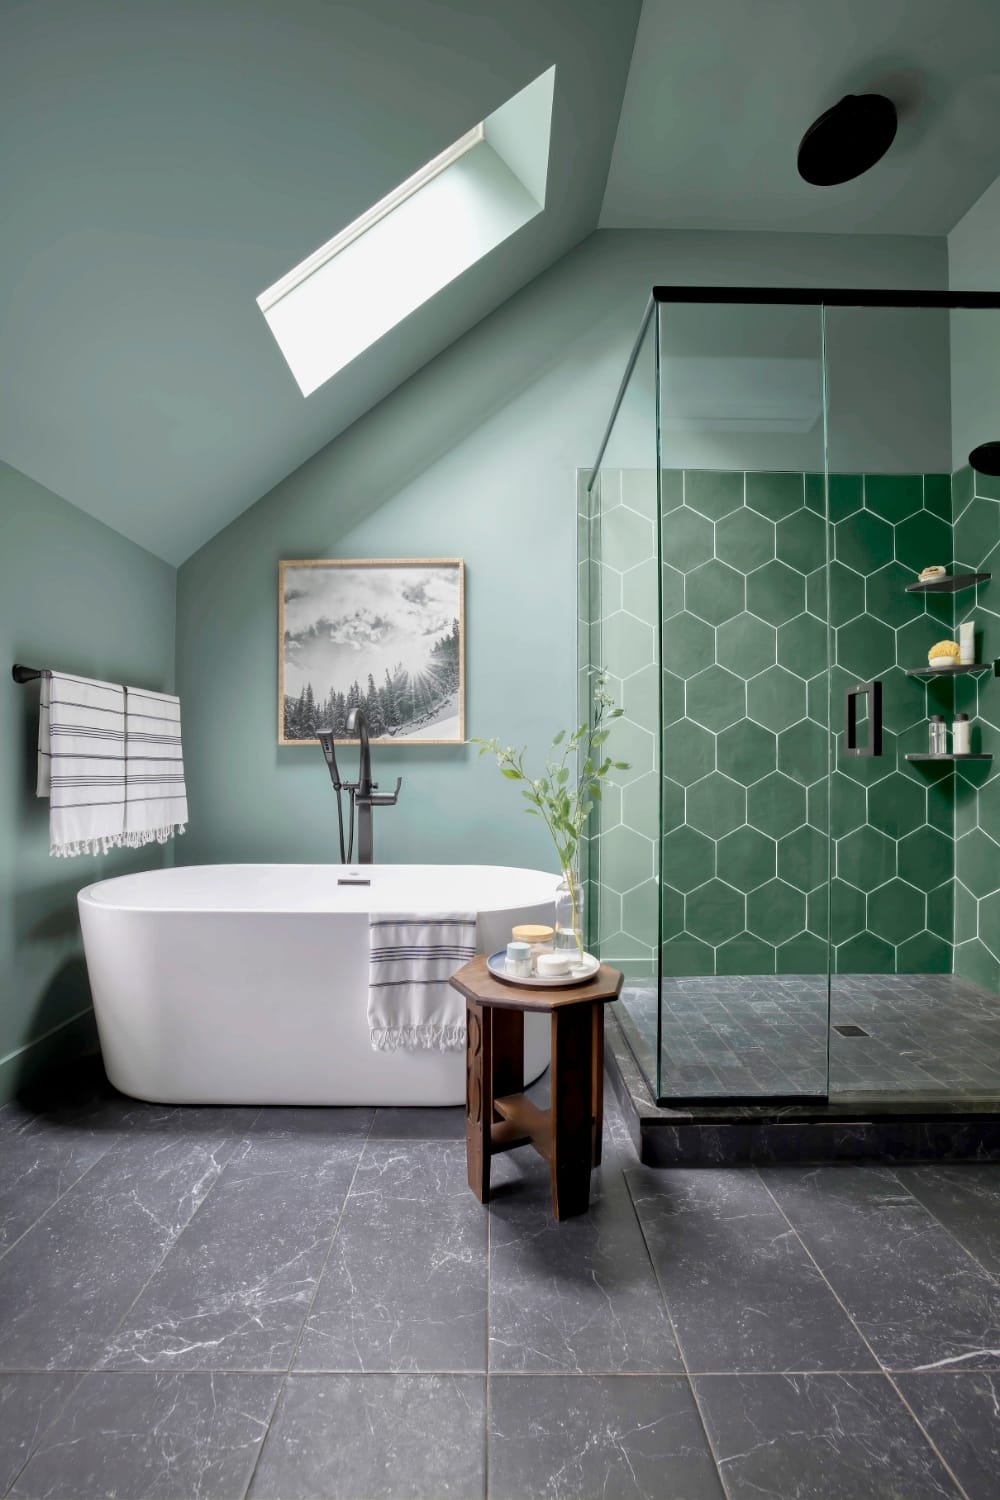 bathroom with green painted walls and matching hexagonal shower tile with a skylight over the bathtub